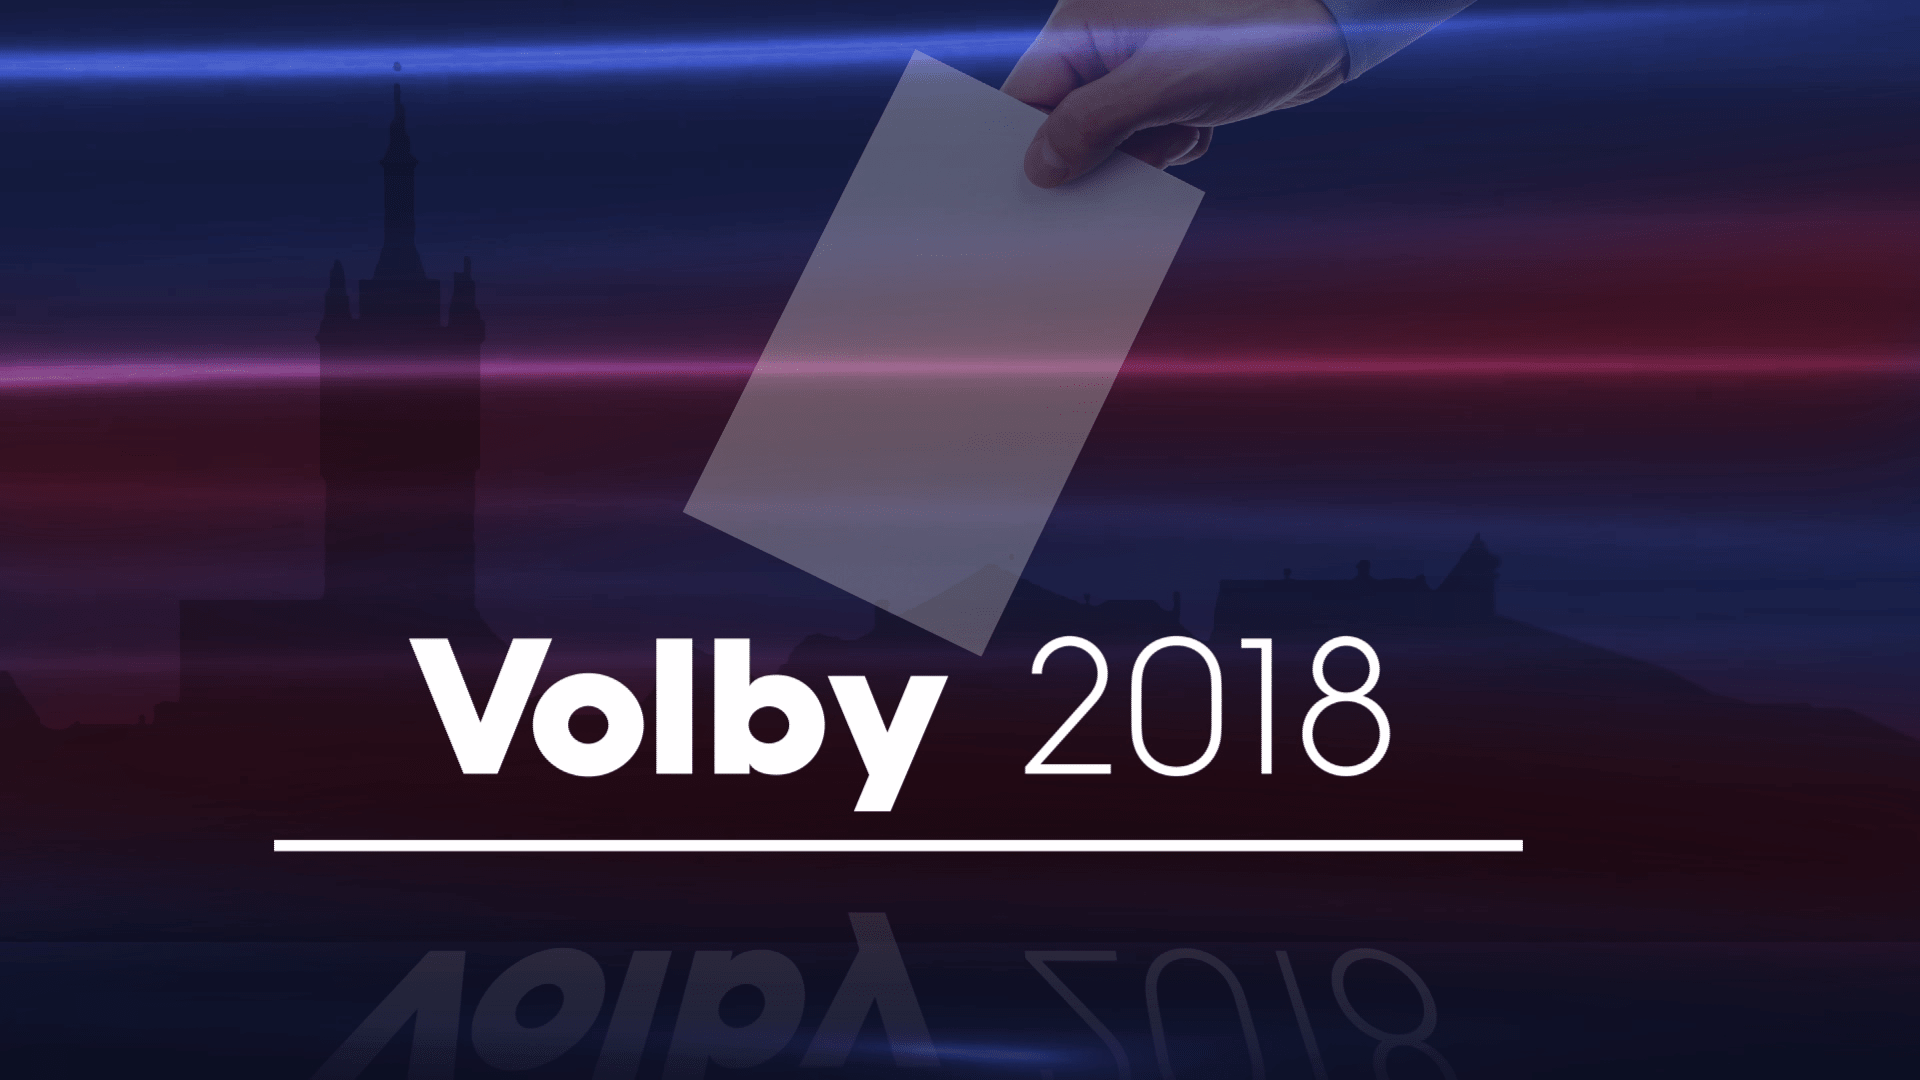 VOLBY 2018